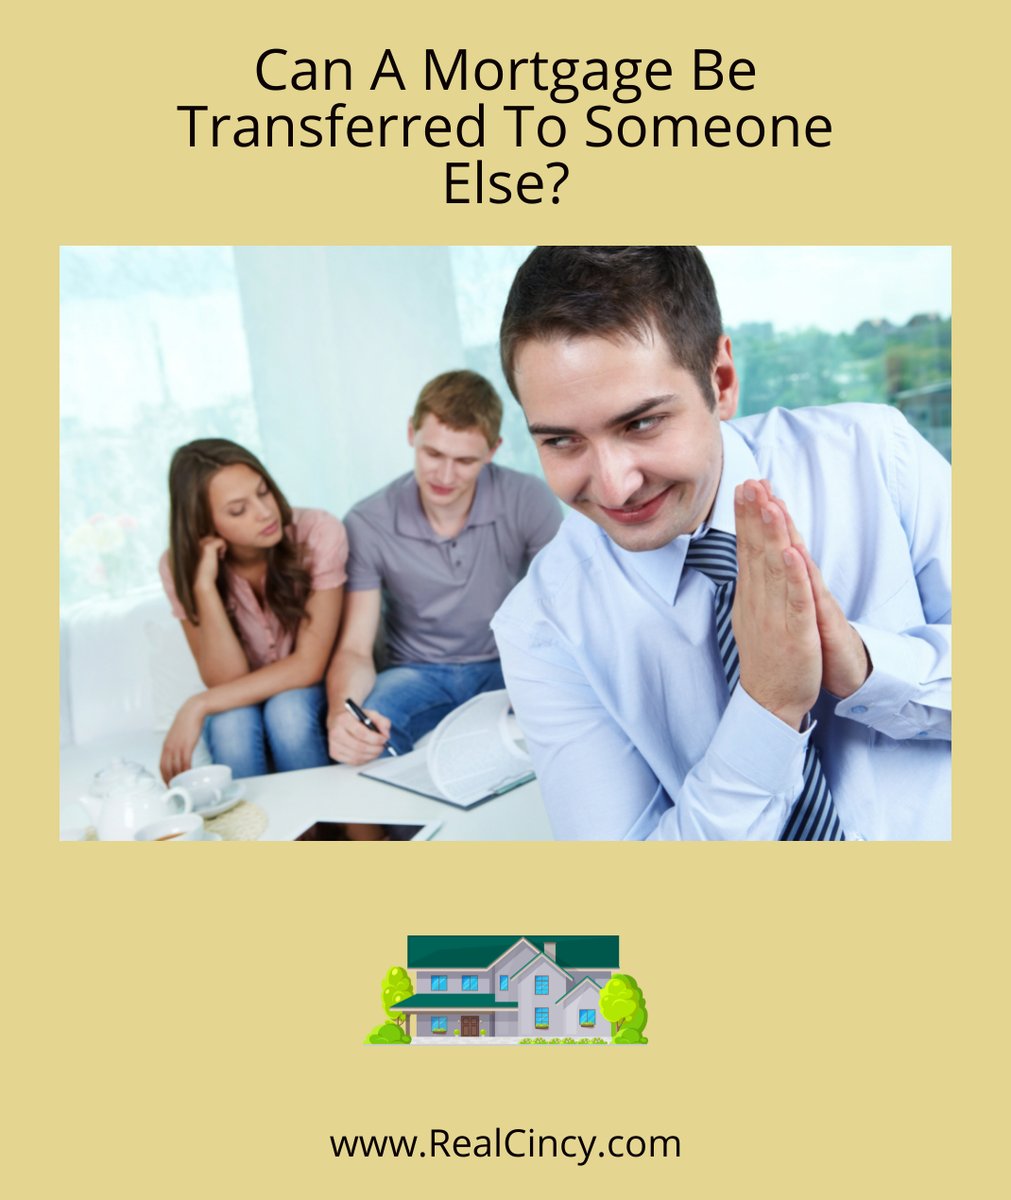 Can A Mortgage Be Transferred To Someone Else cincinkyrealestate.com/blog/can-a-mor… Cincinnati & Northern Kentucky Real Estate